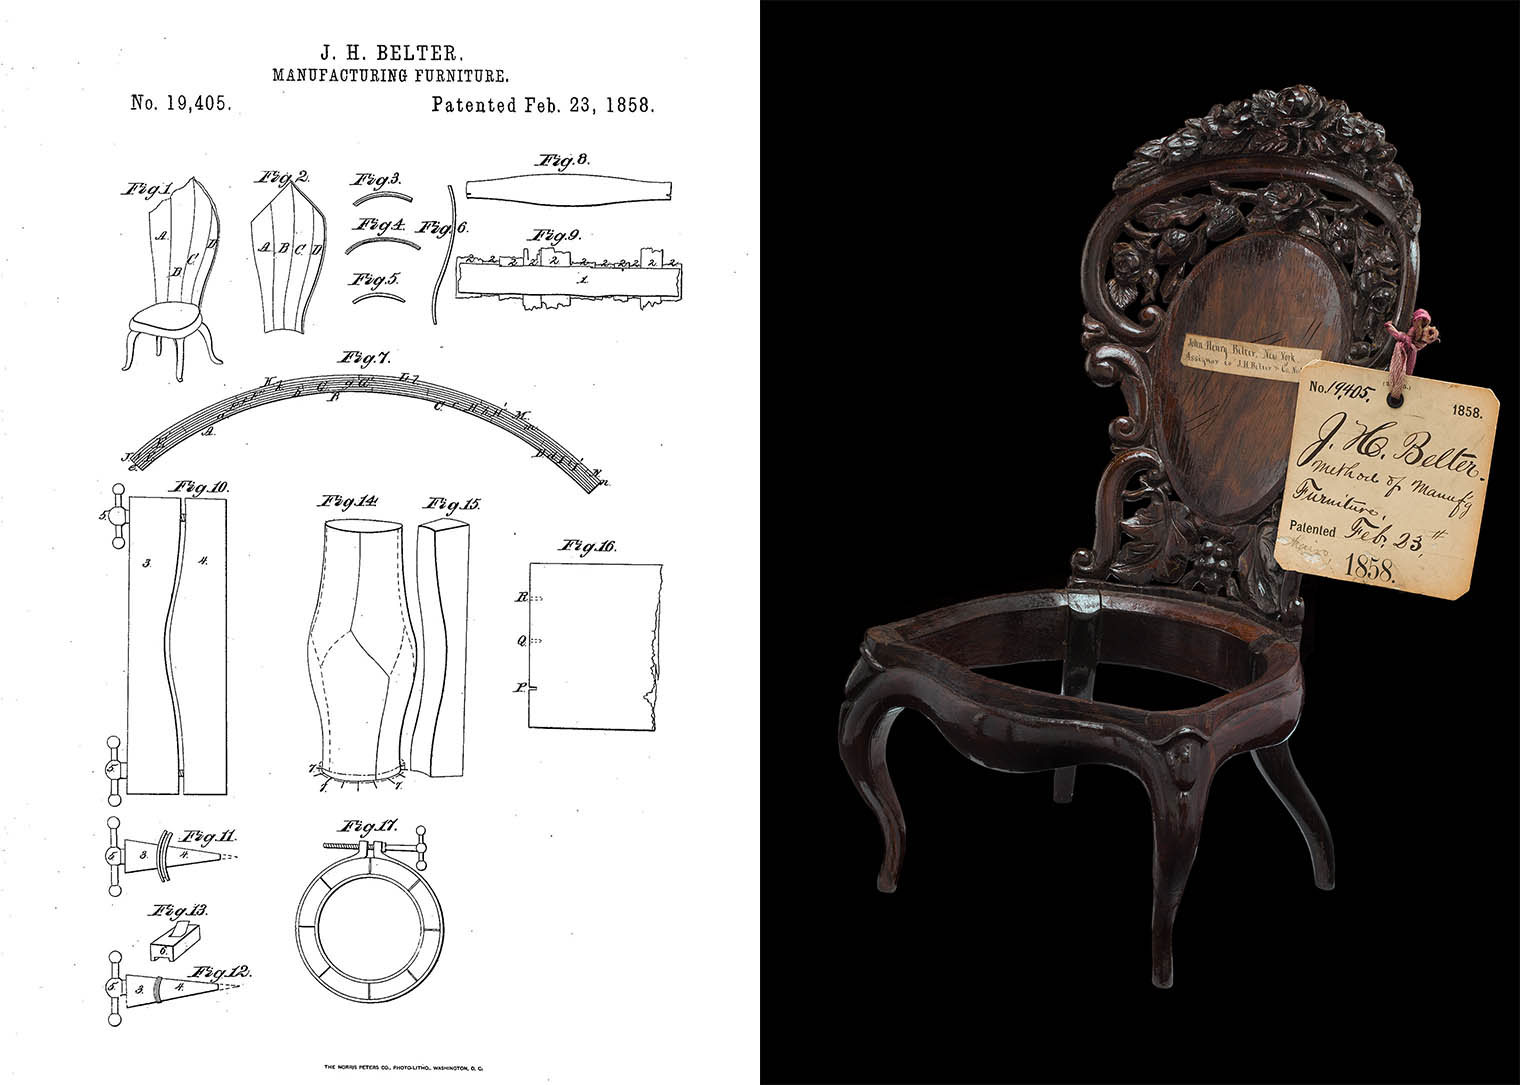 Left: an illustration from US Patent 19,405 exhibiting models of components of John H. Belter's technology. Right: An image of a model of the chair from the collection of The Smithsonian NMAH